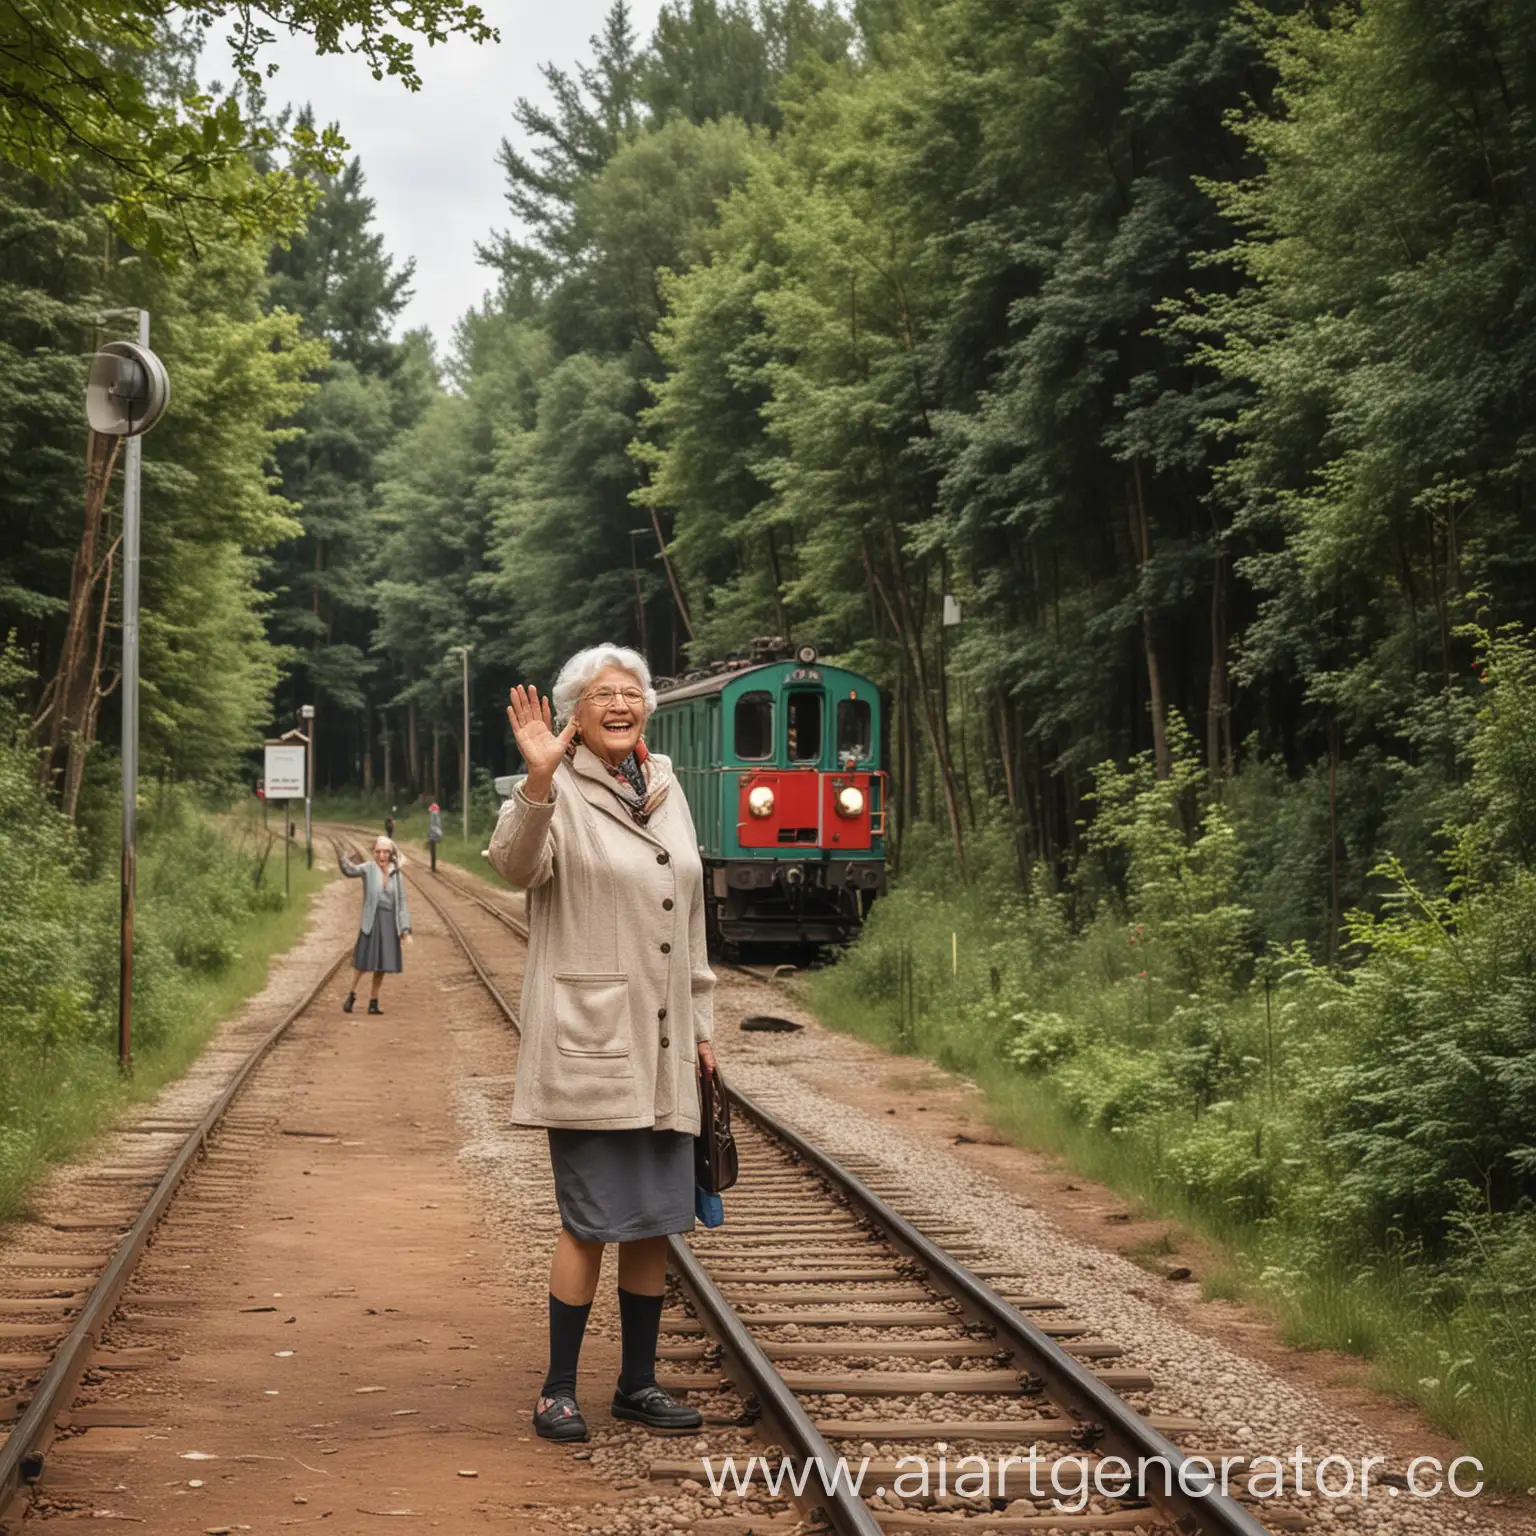 There is a small railway station next to the forest, where there is a smiling grandmother waving her hand, and there is a train nearby